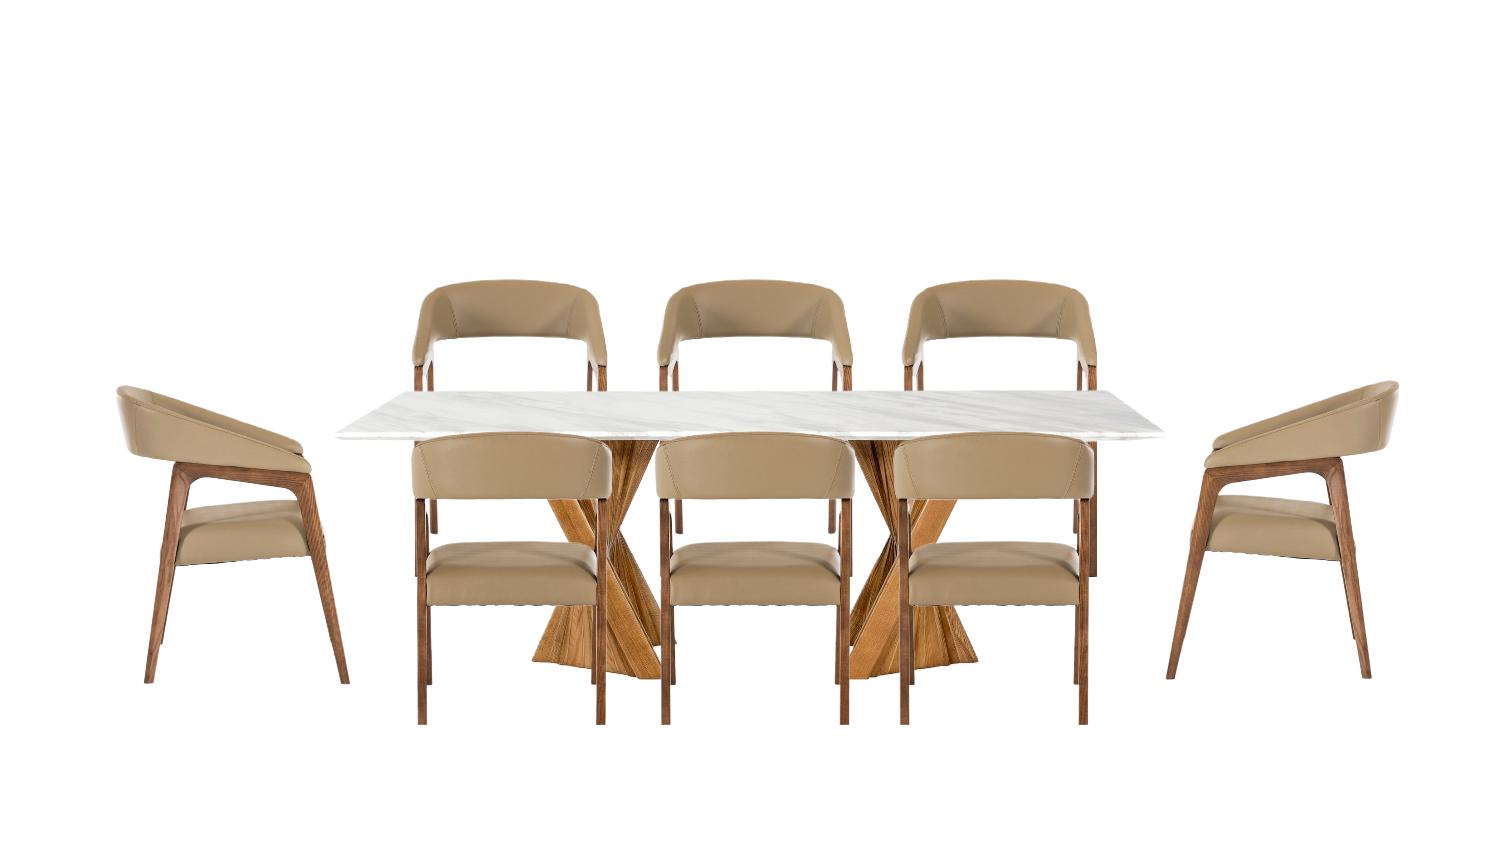 Contemporary, Modern Dining Room Set Cadence Clive VGCSDT-1571-MRB-9pcs in White, Brown Leatherette